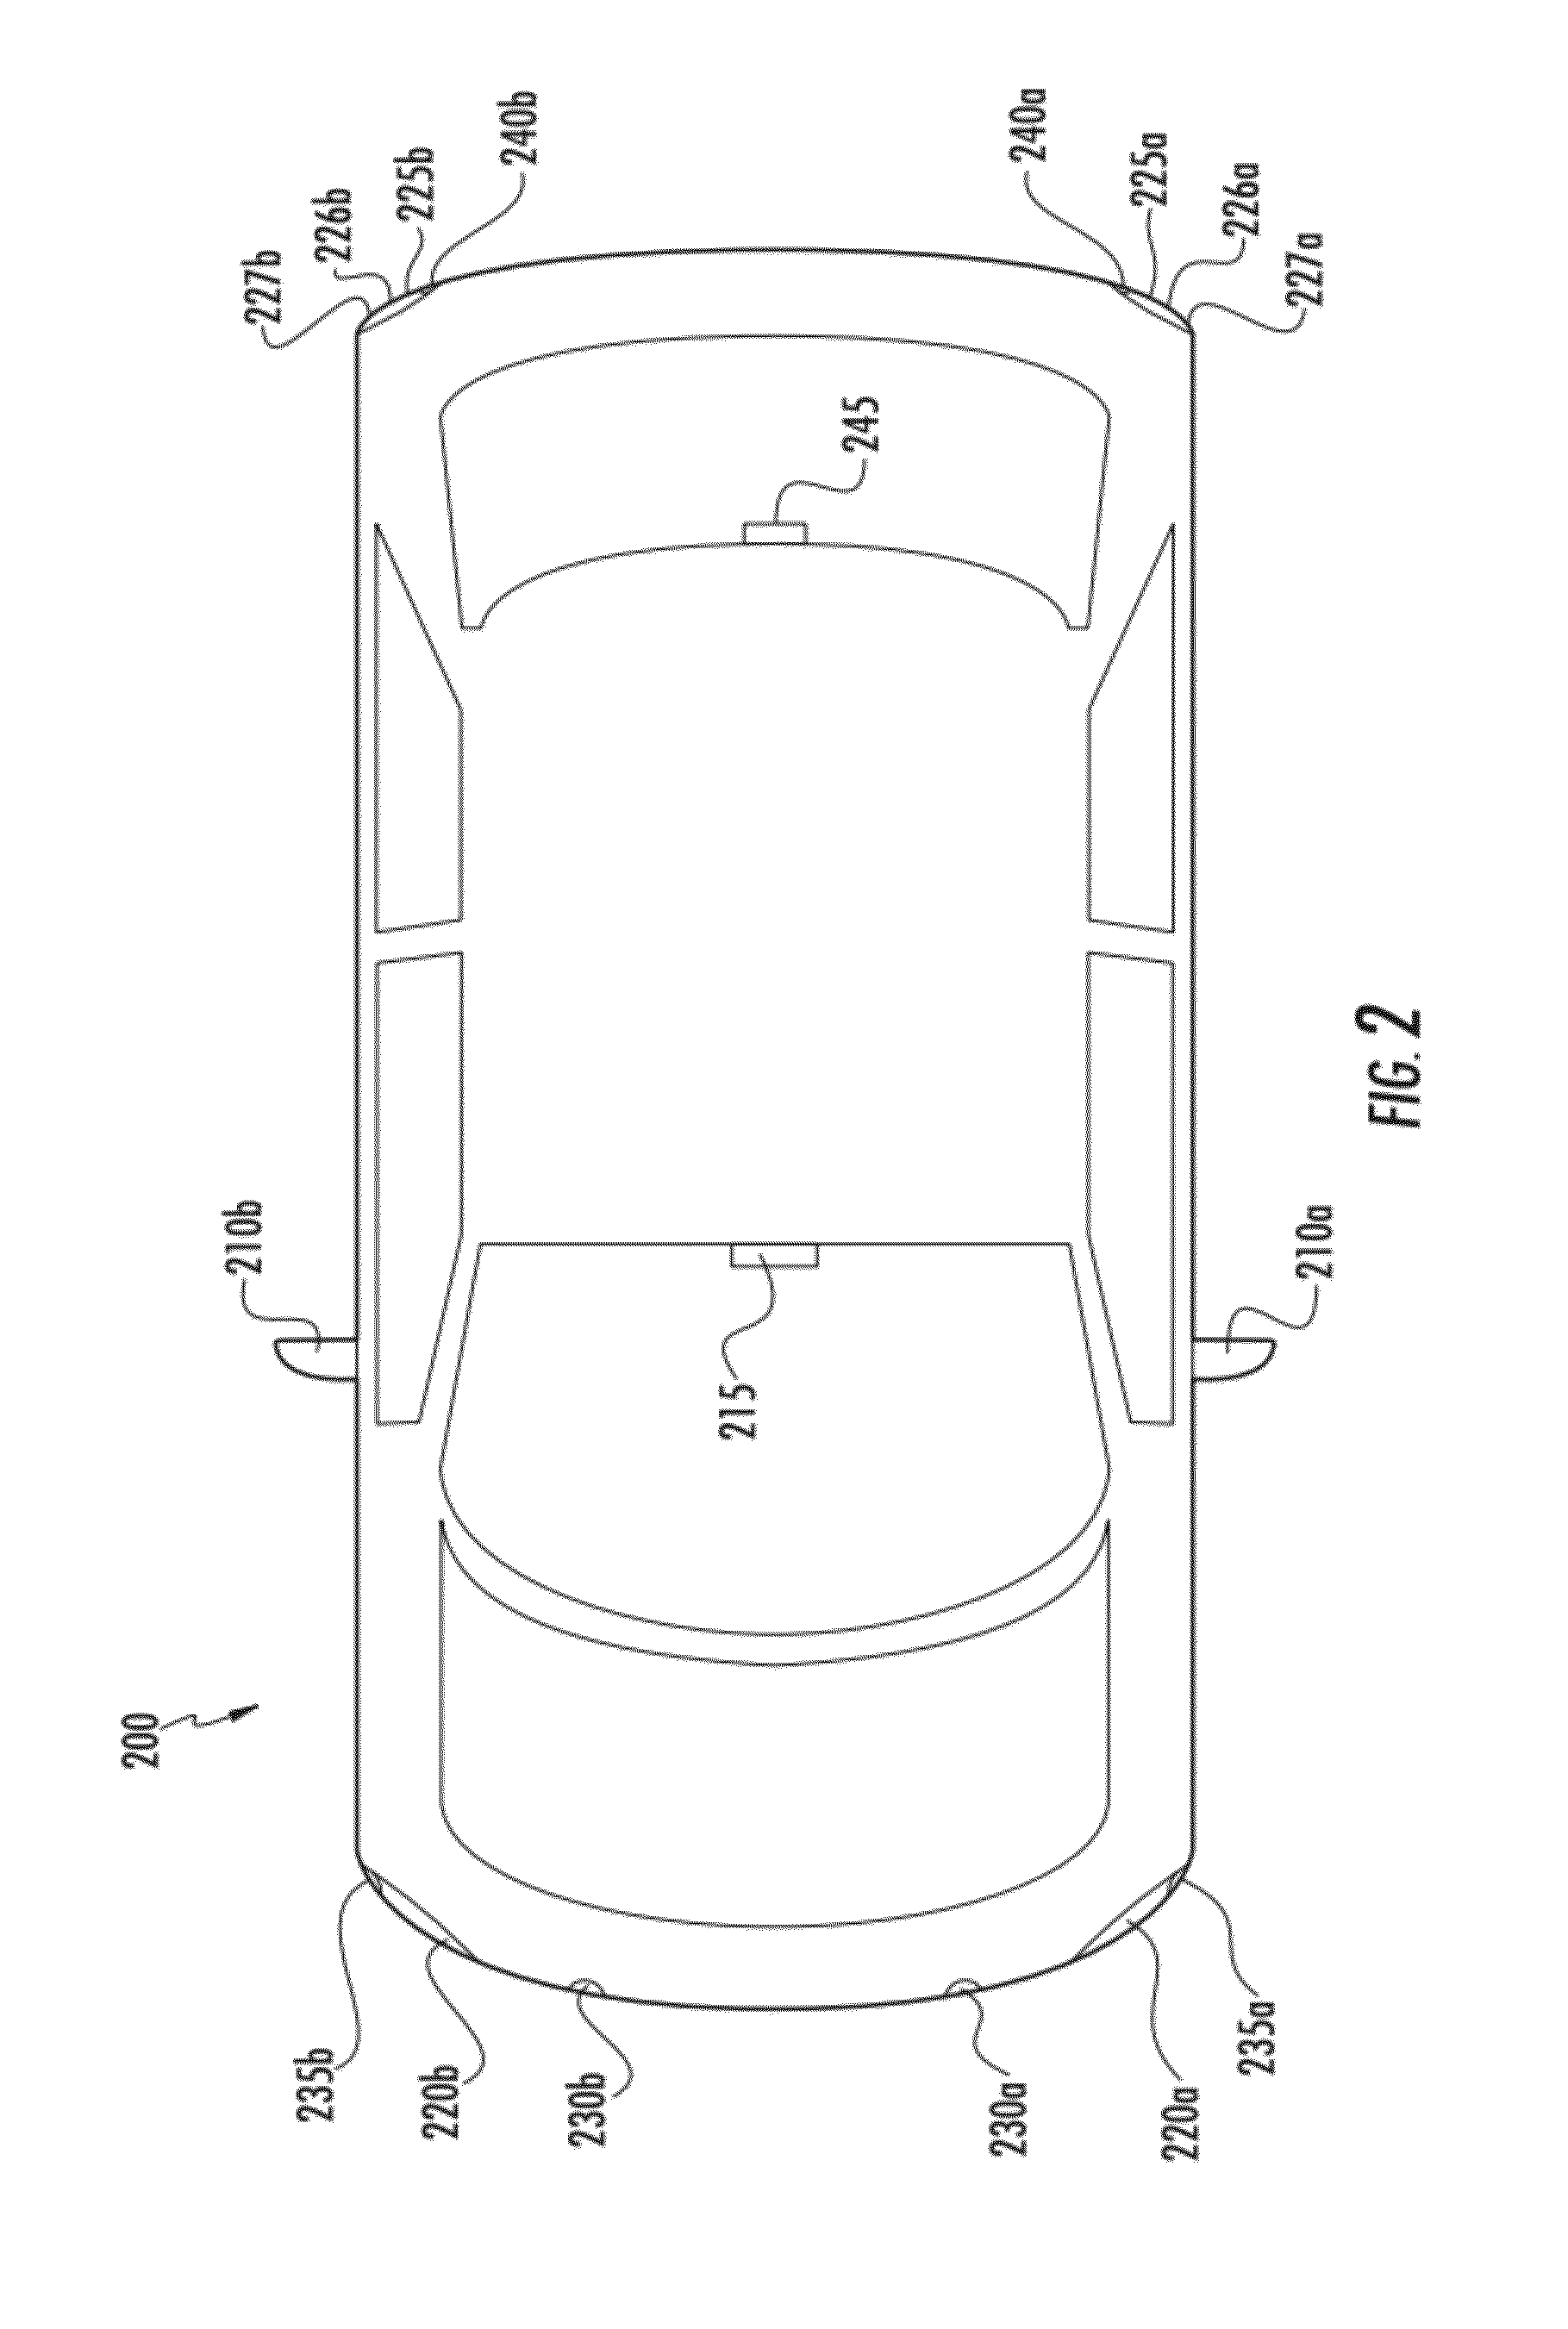 Rearview assembly for a vehicle